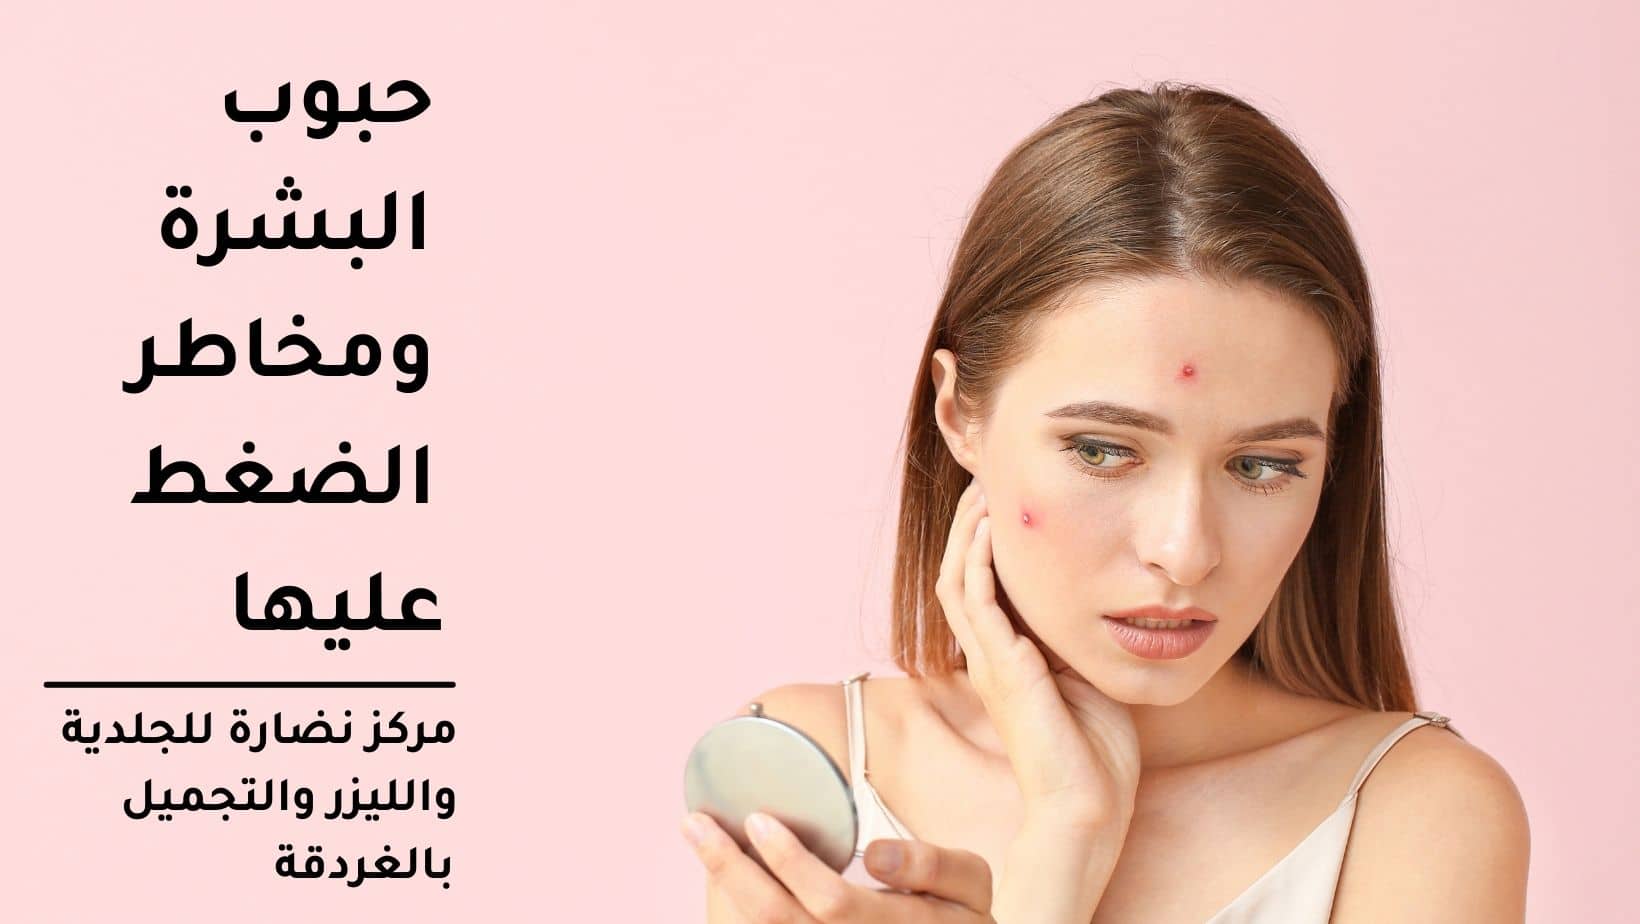 Skin pimples and the risks of stress